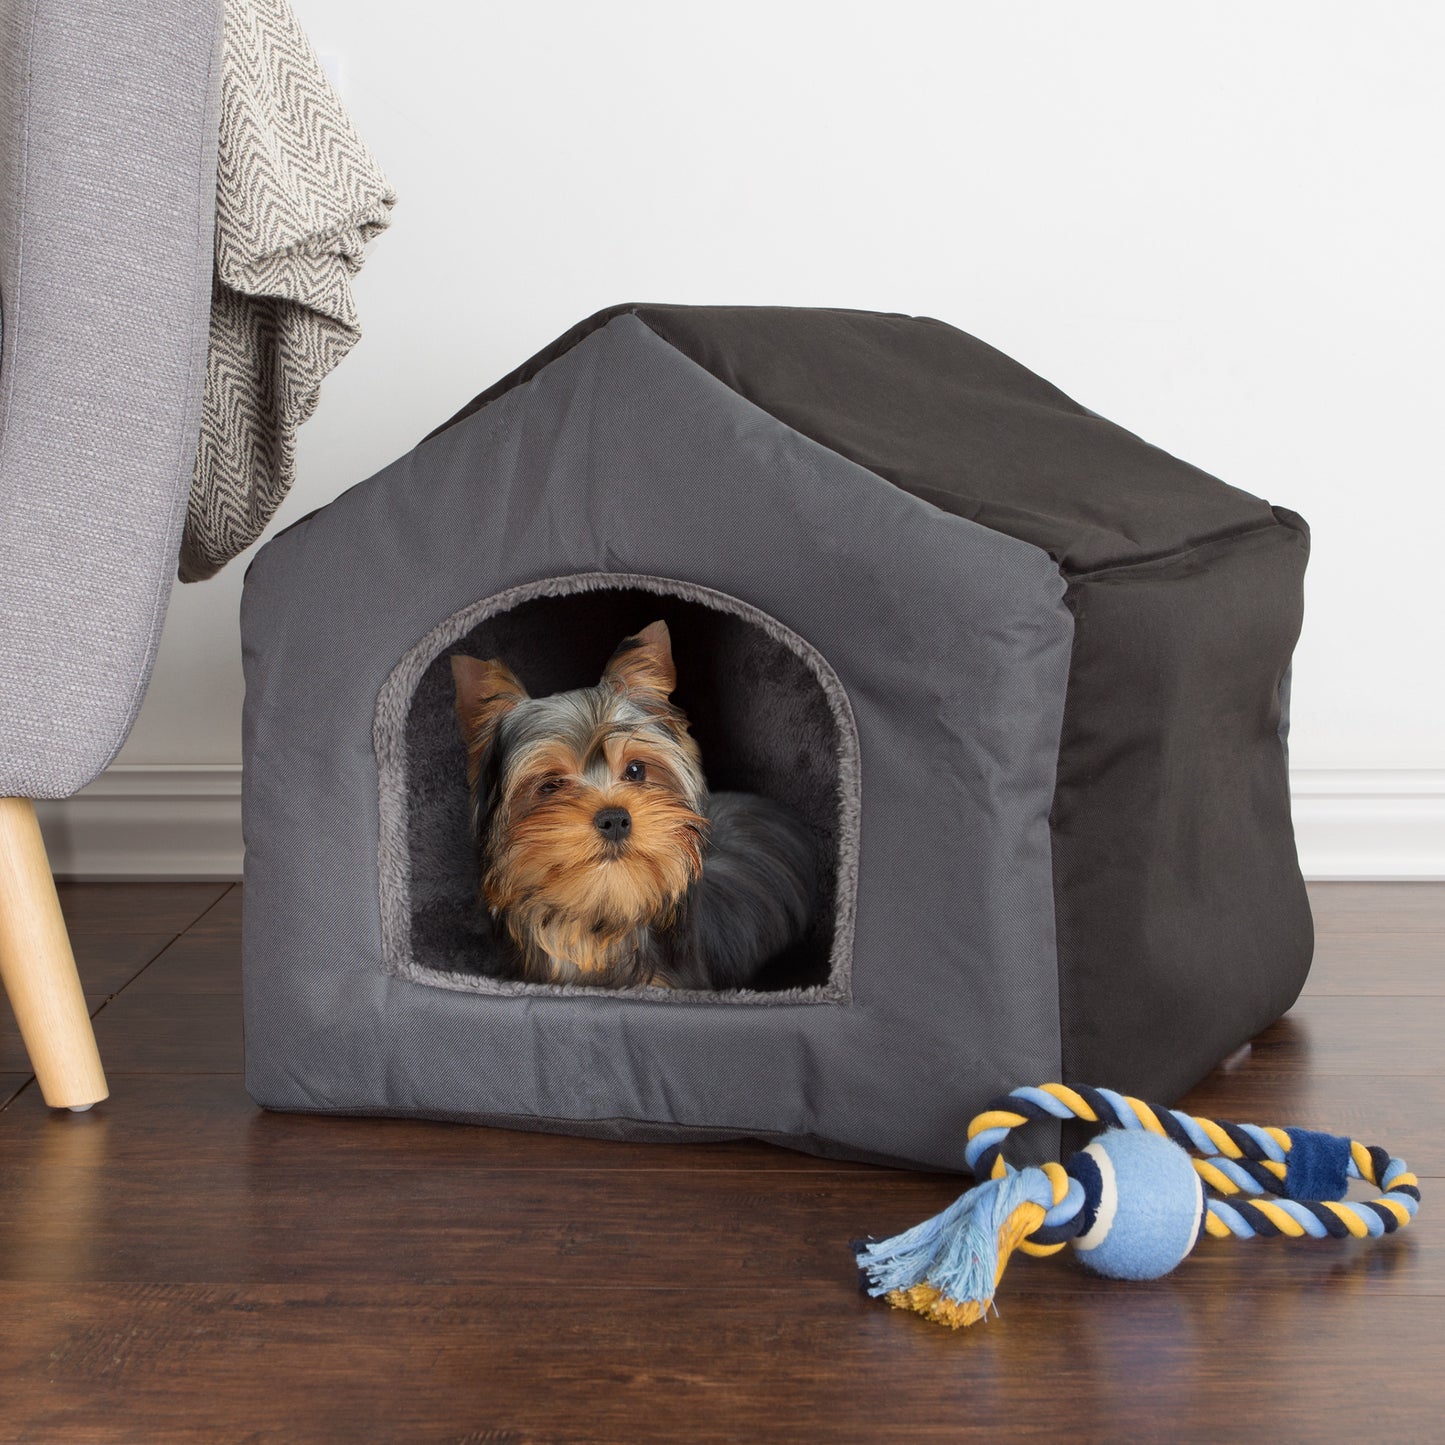 Doghouse with Removable Sherpa Pad